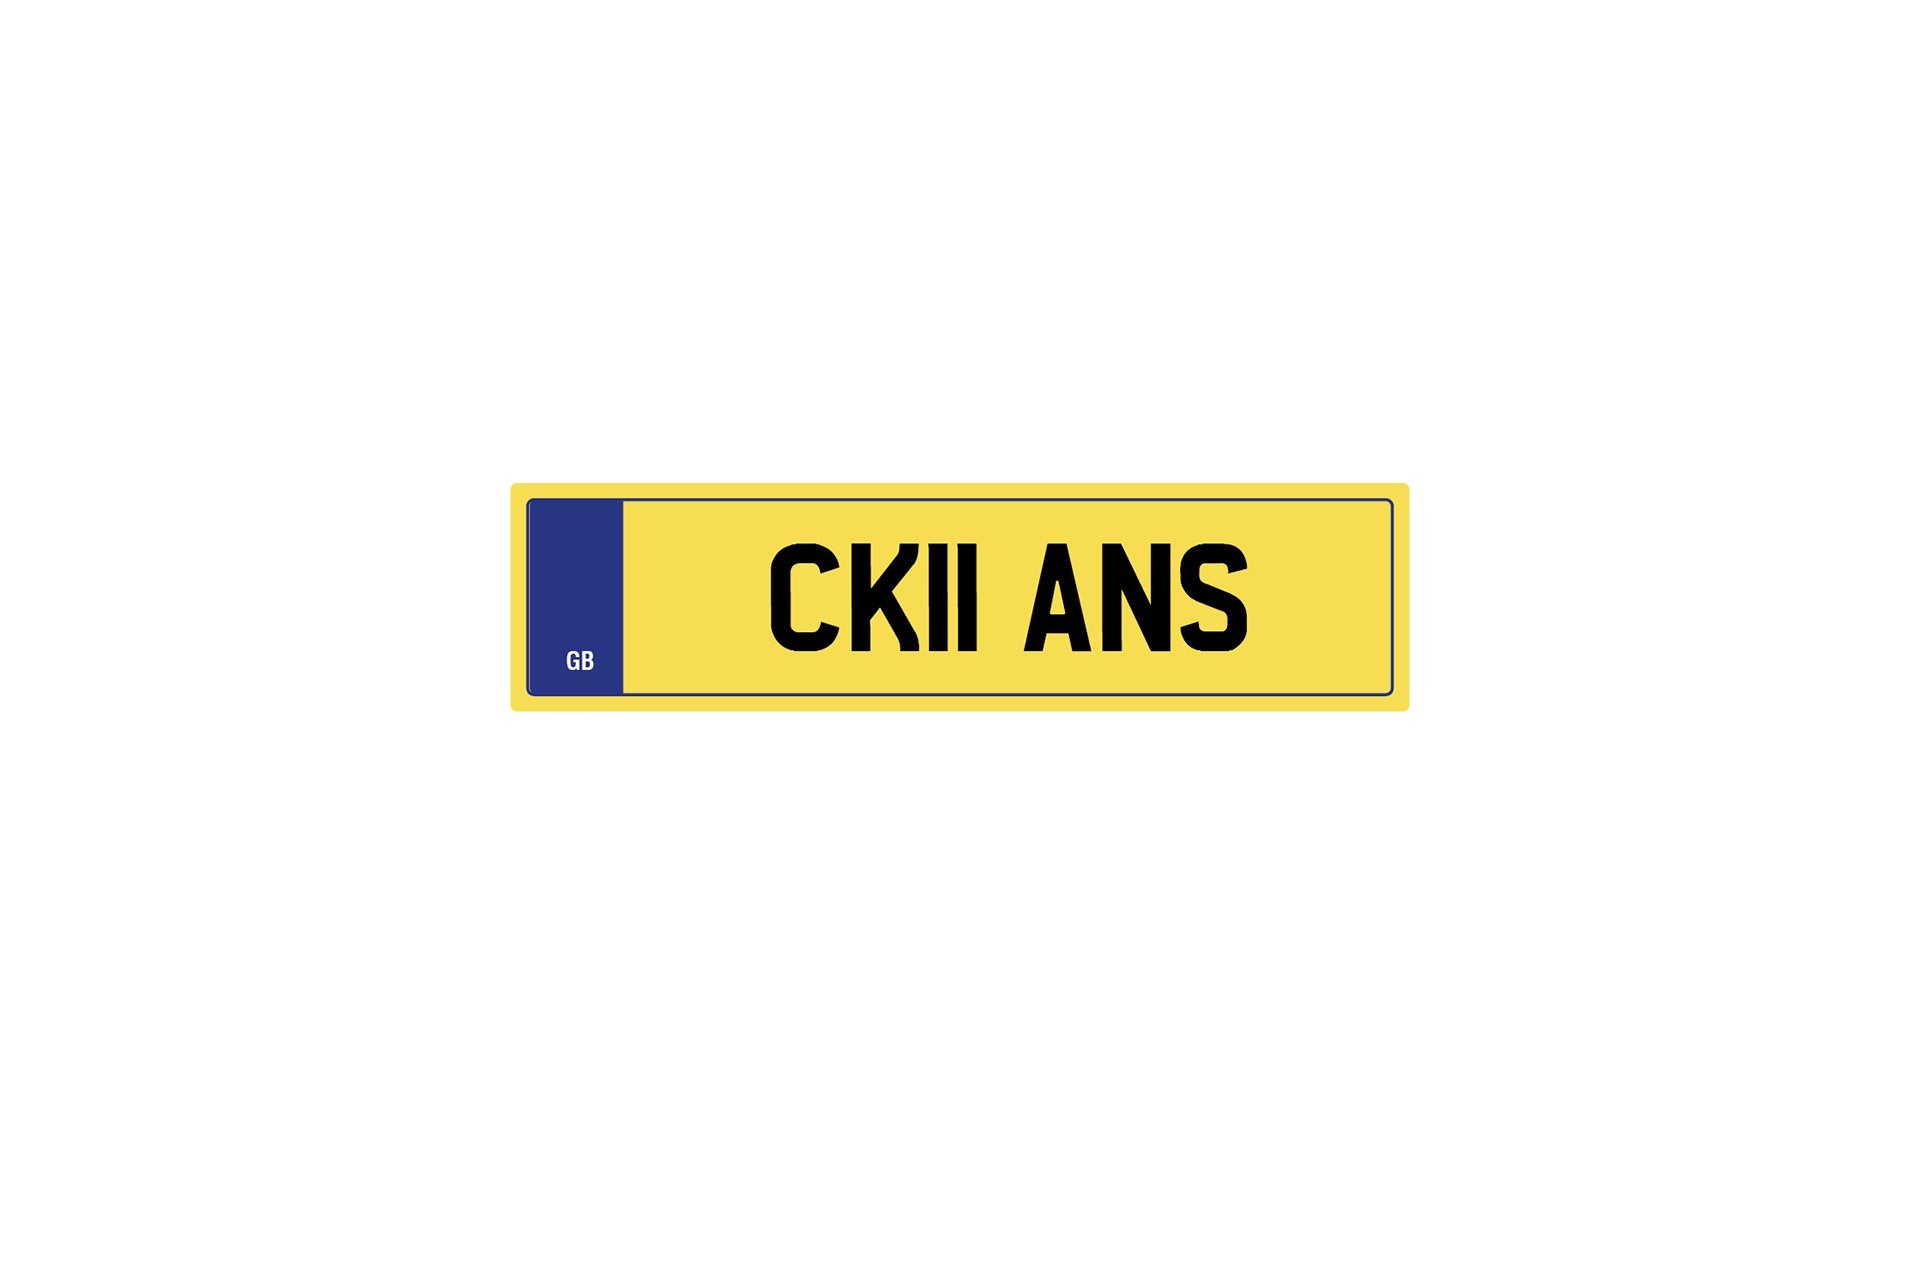 Private Plate Ck11 Ans by Kahn - Image 197